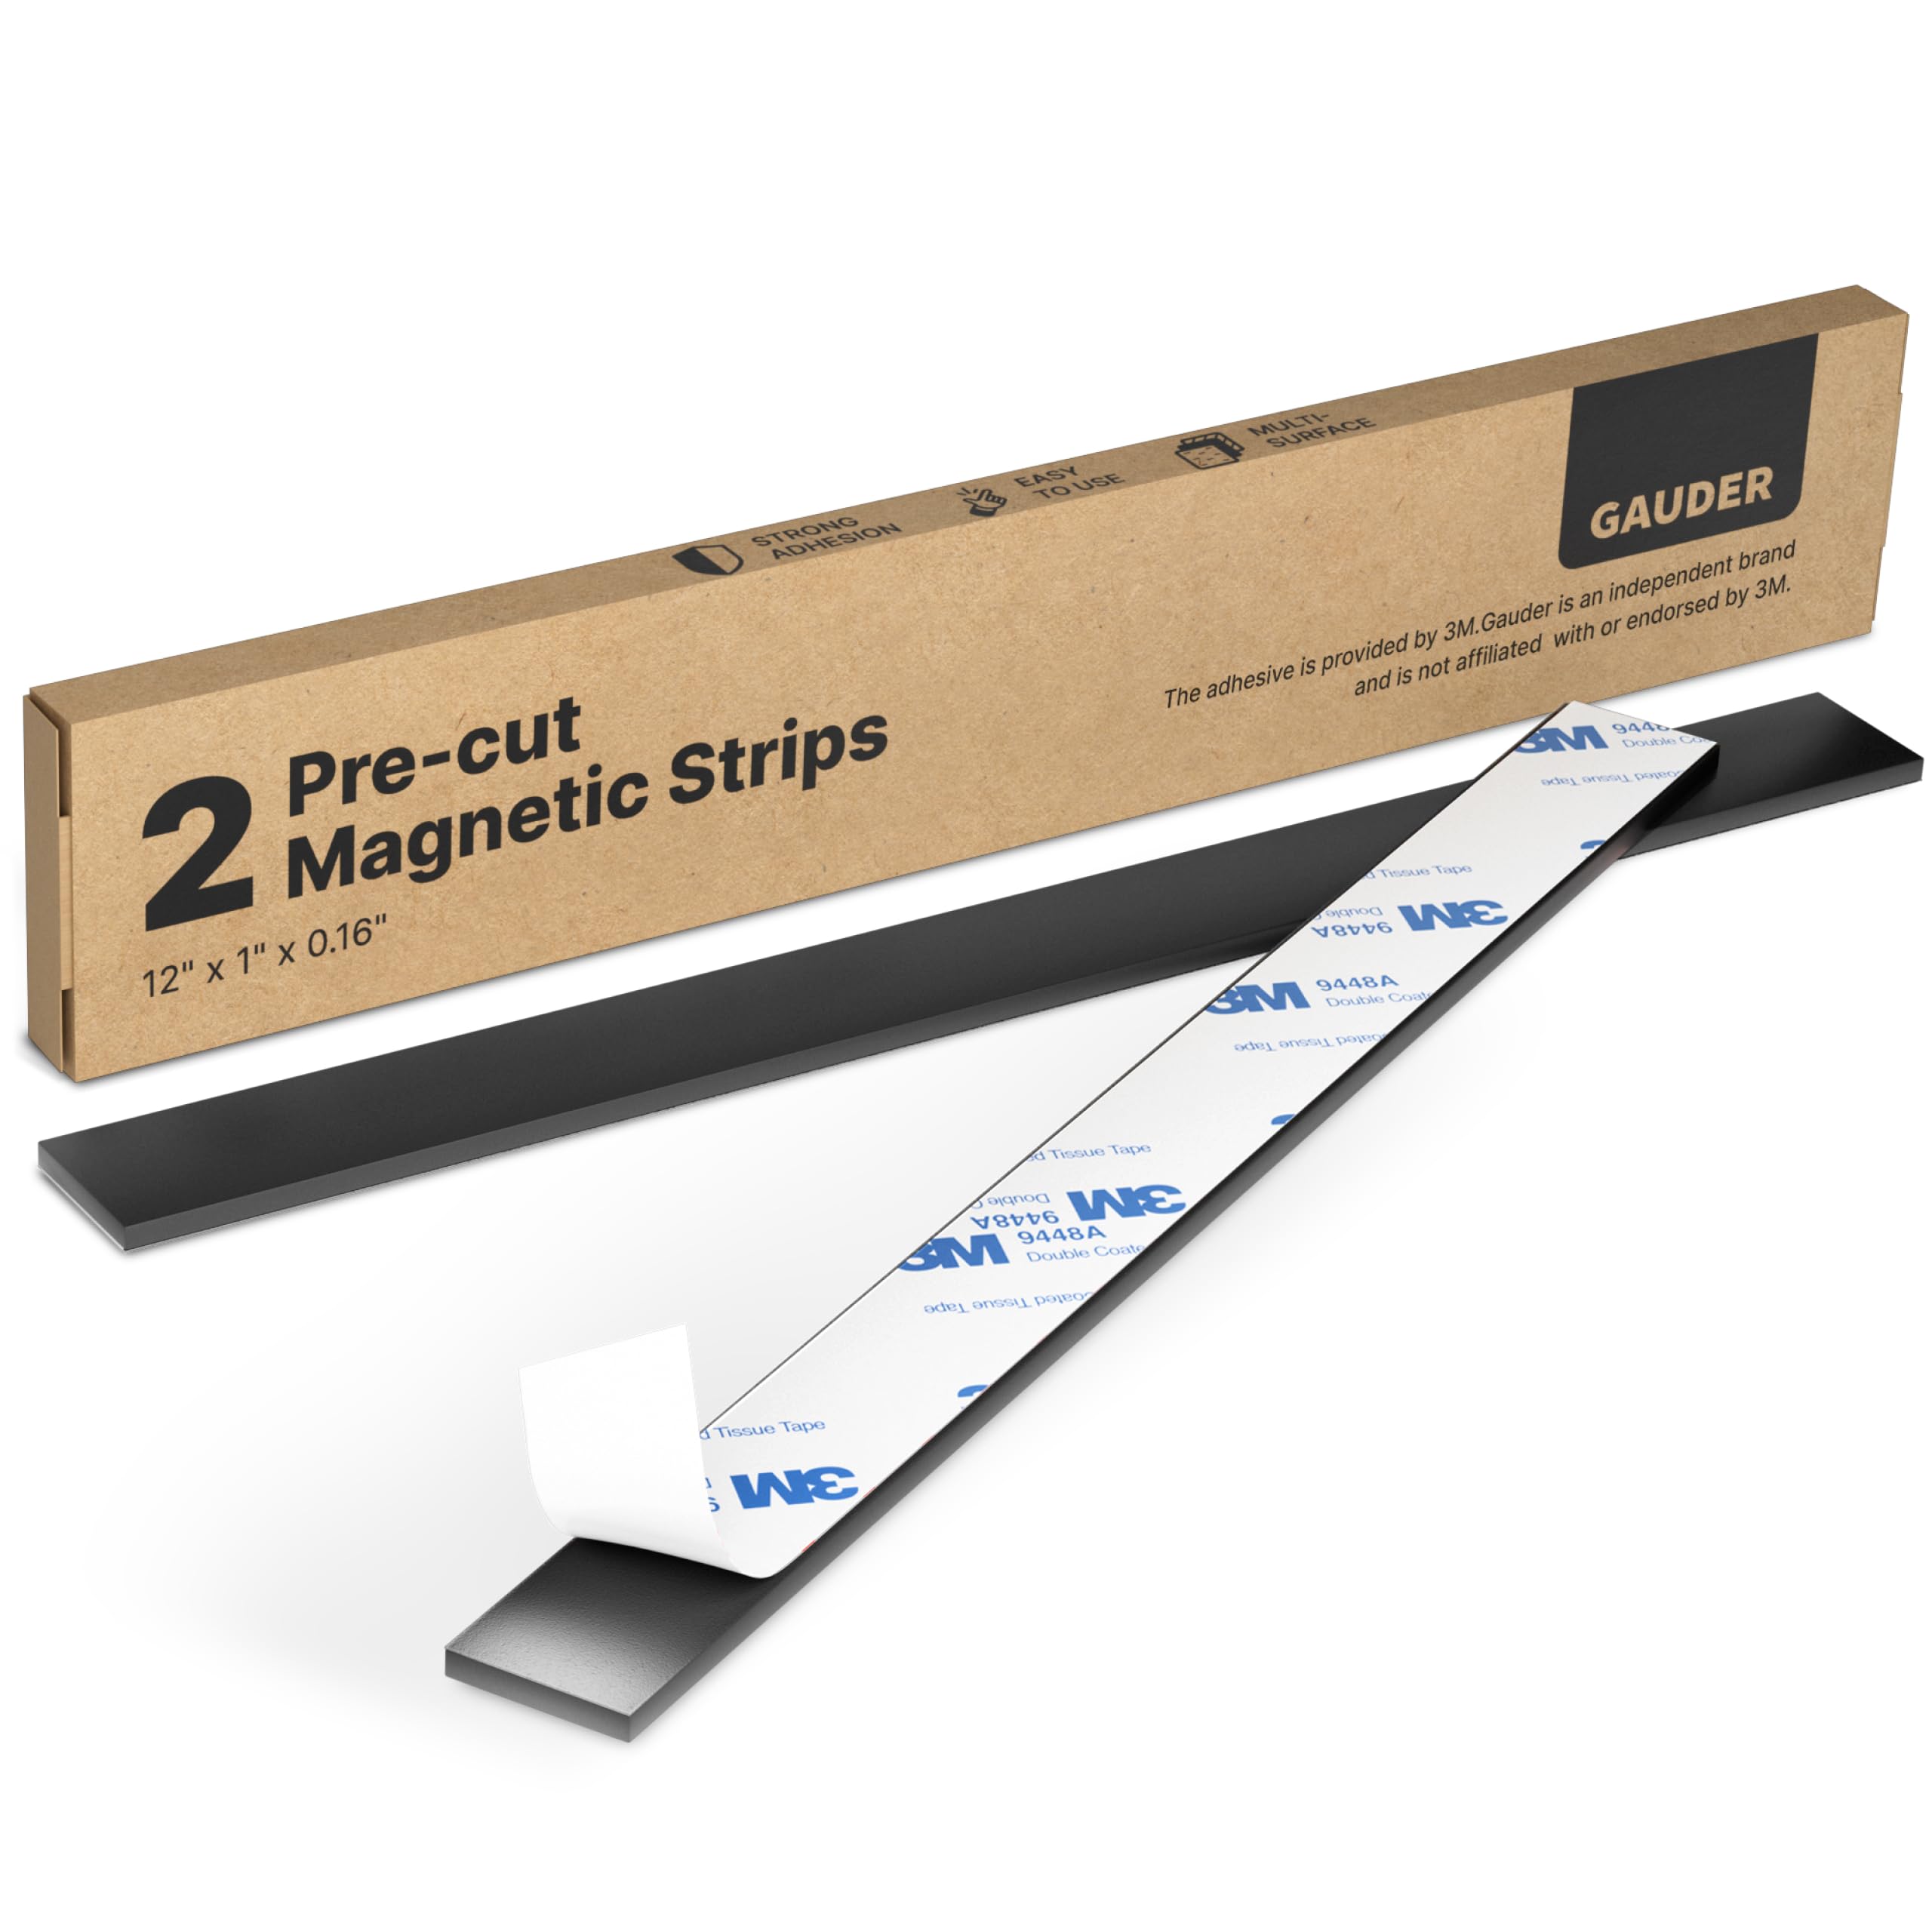 7 GAUDER Magnetic Strips with Adhesive Backing (12 inches x 0.16